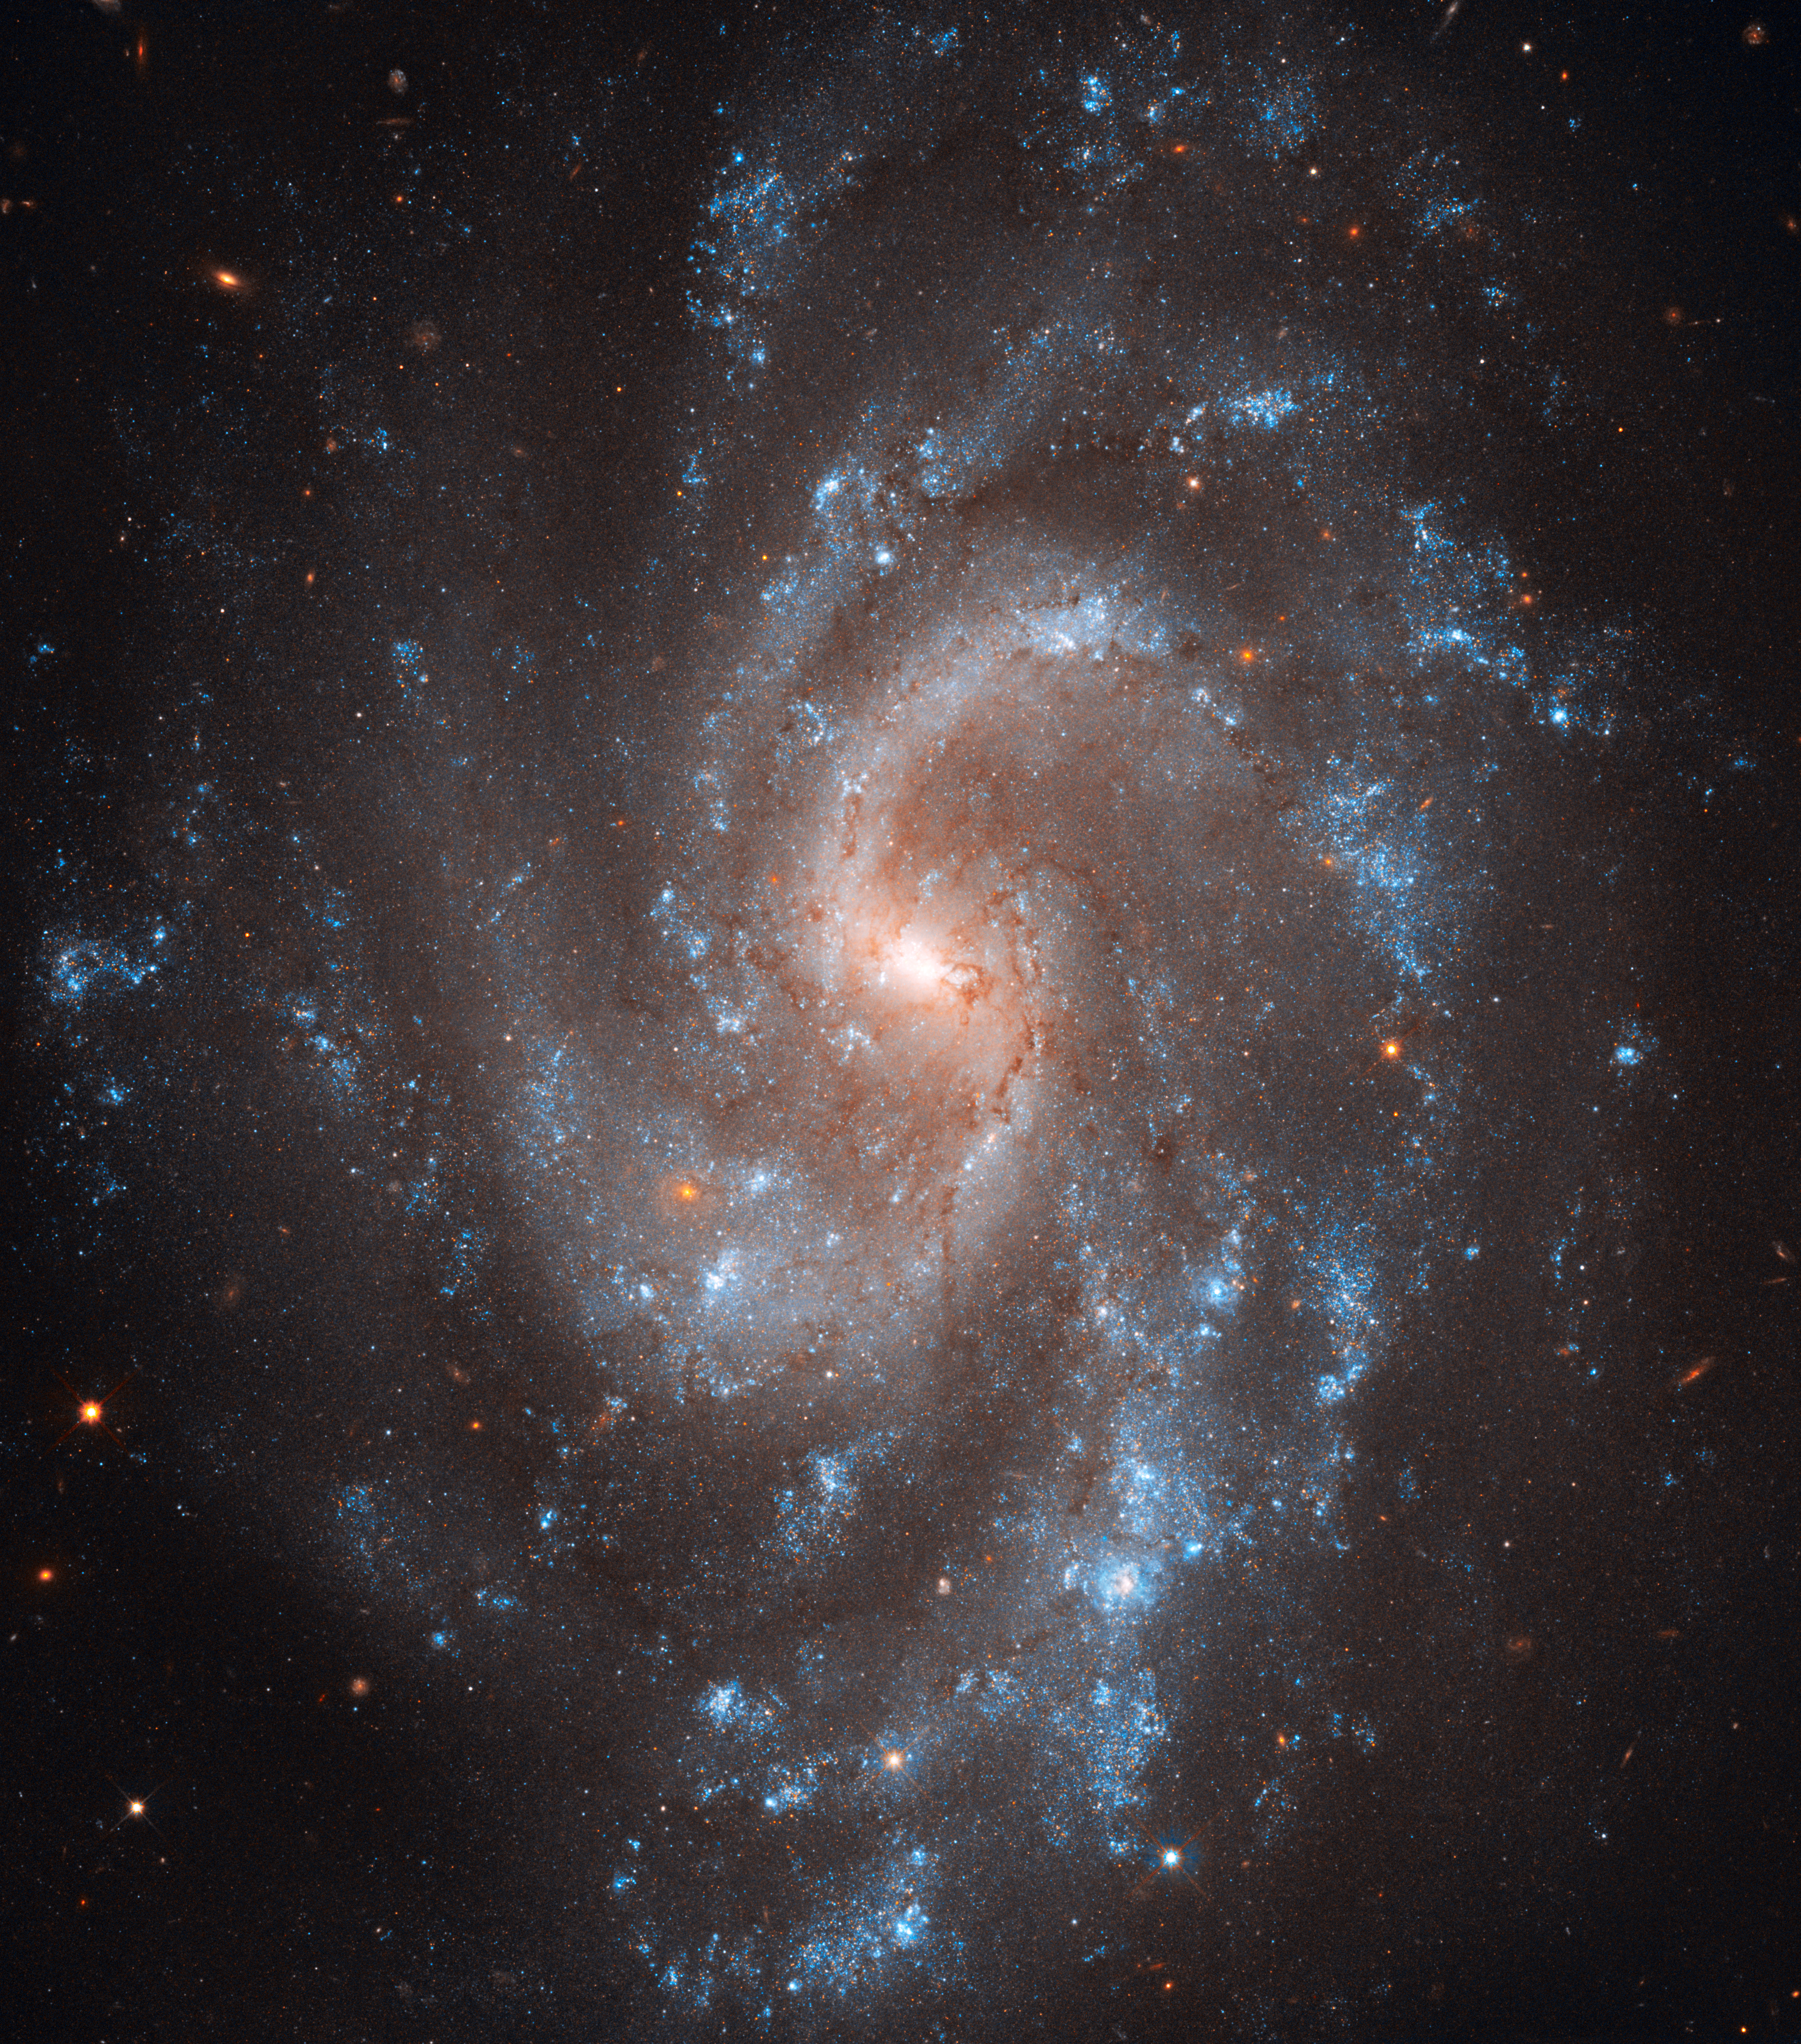 NGC 5584 (captured by the Hubble Space Telescope)